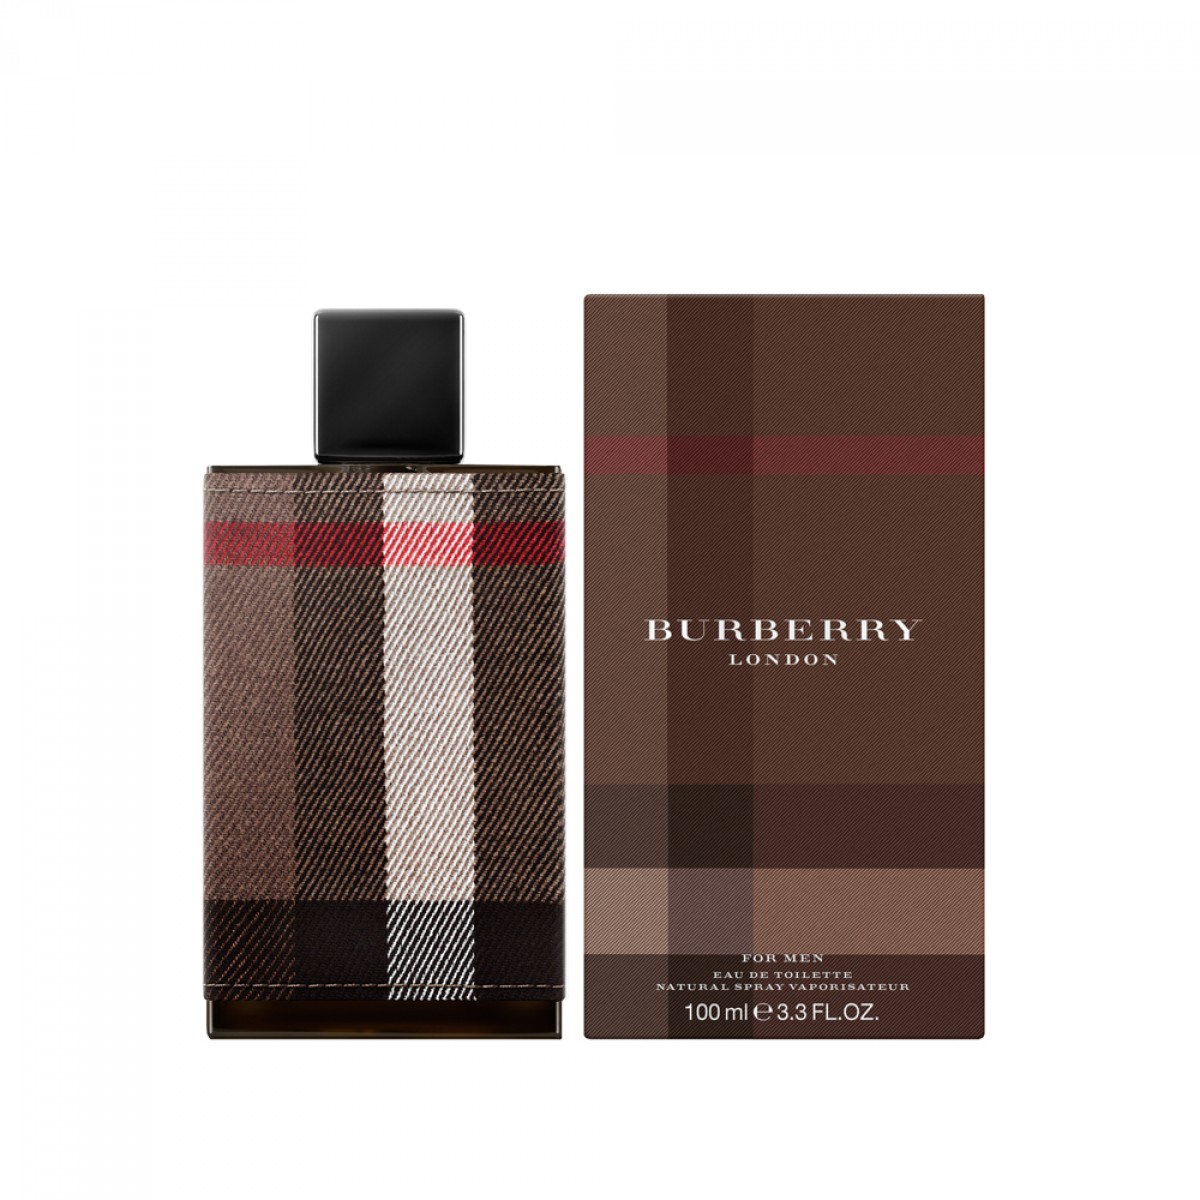 Burberry London Men Aelia Duty Free 10% off on your online order